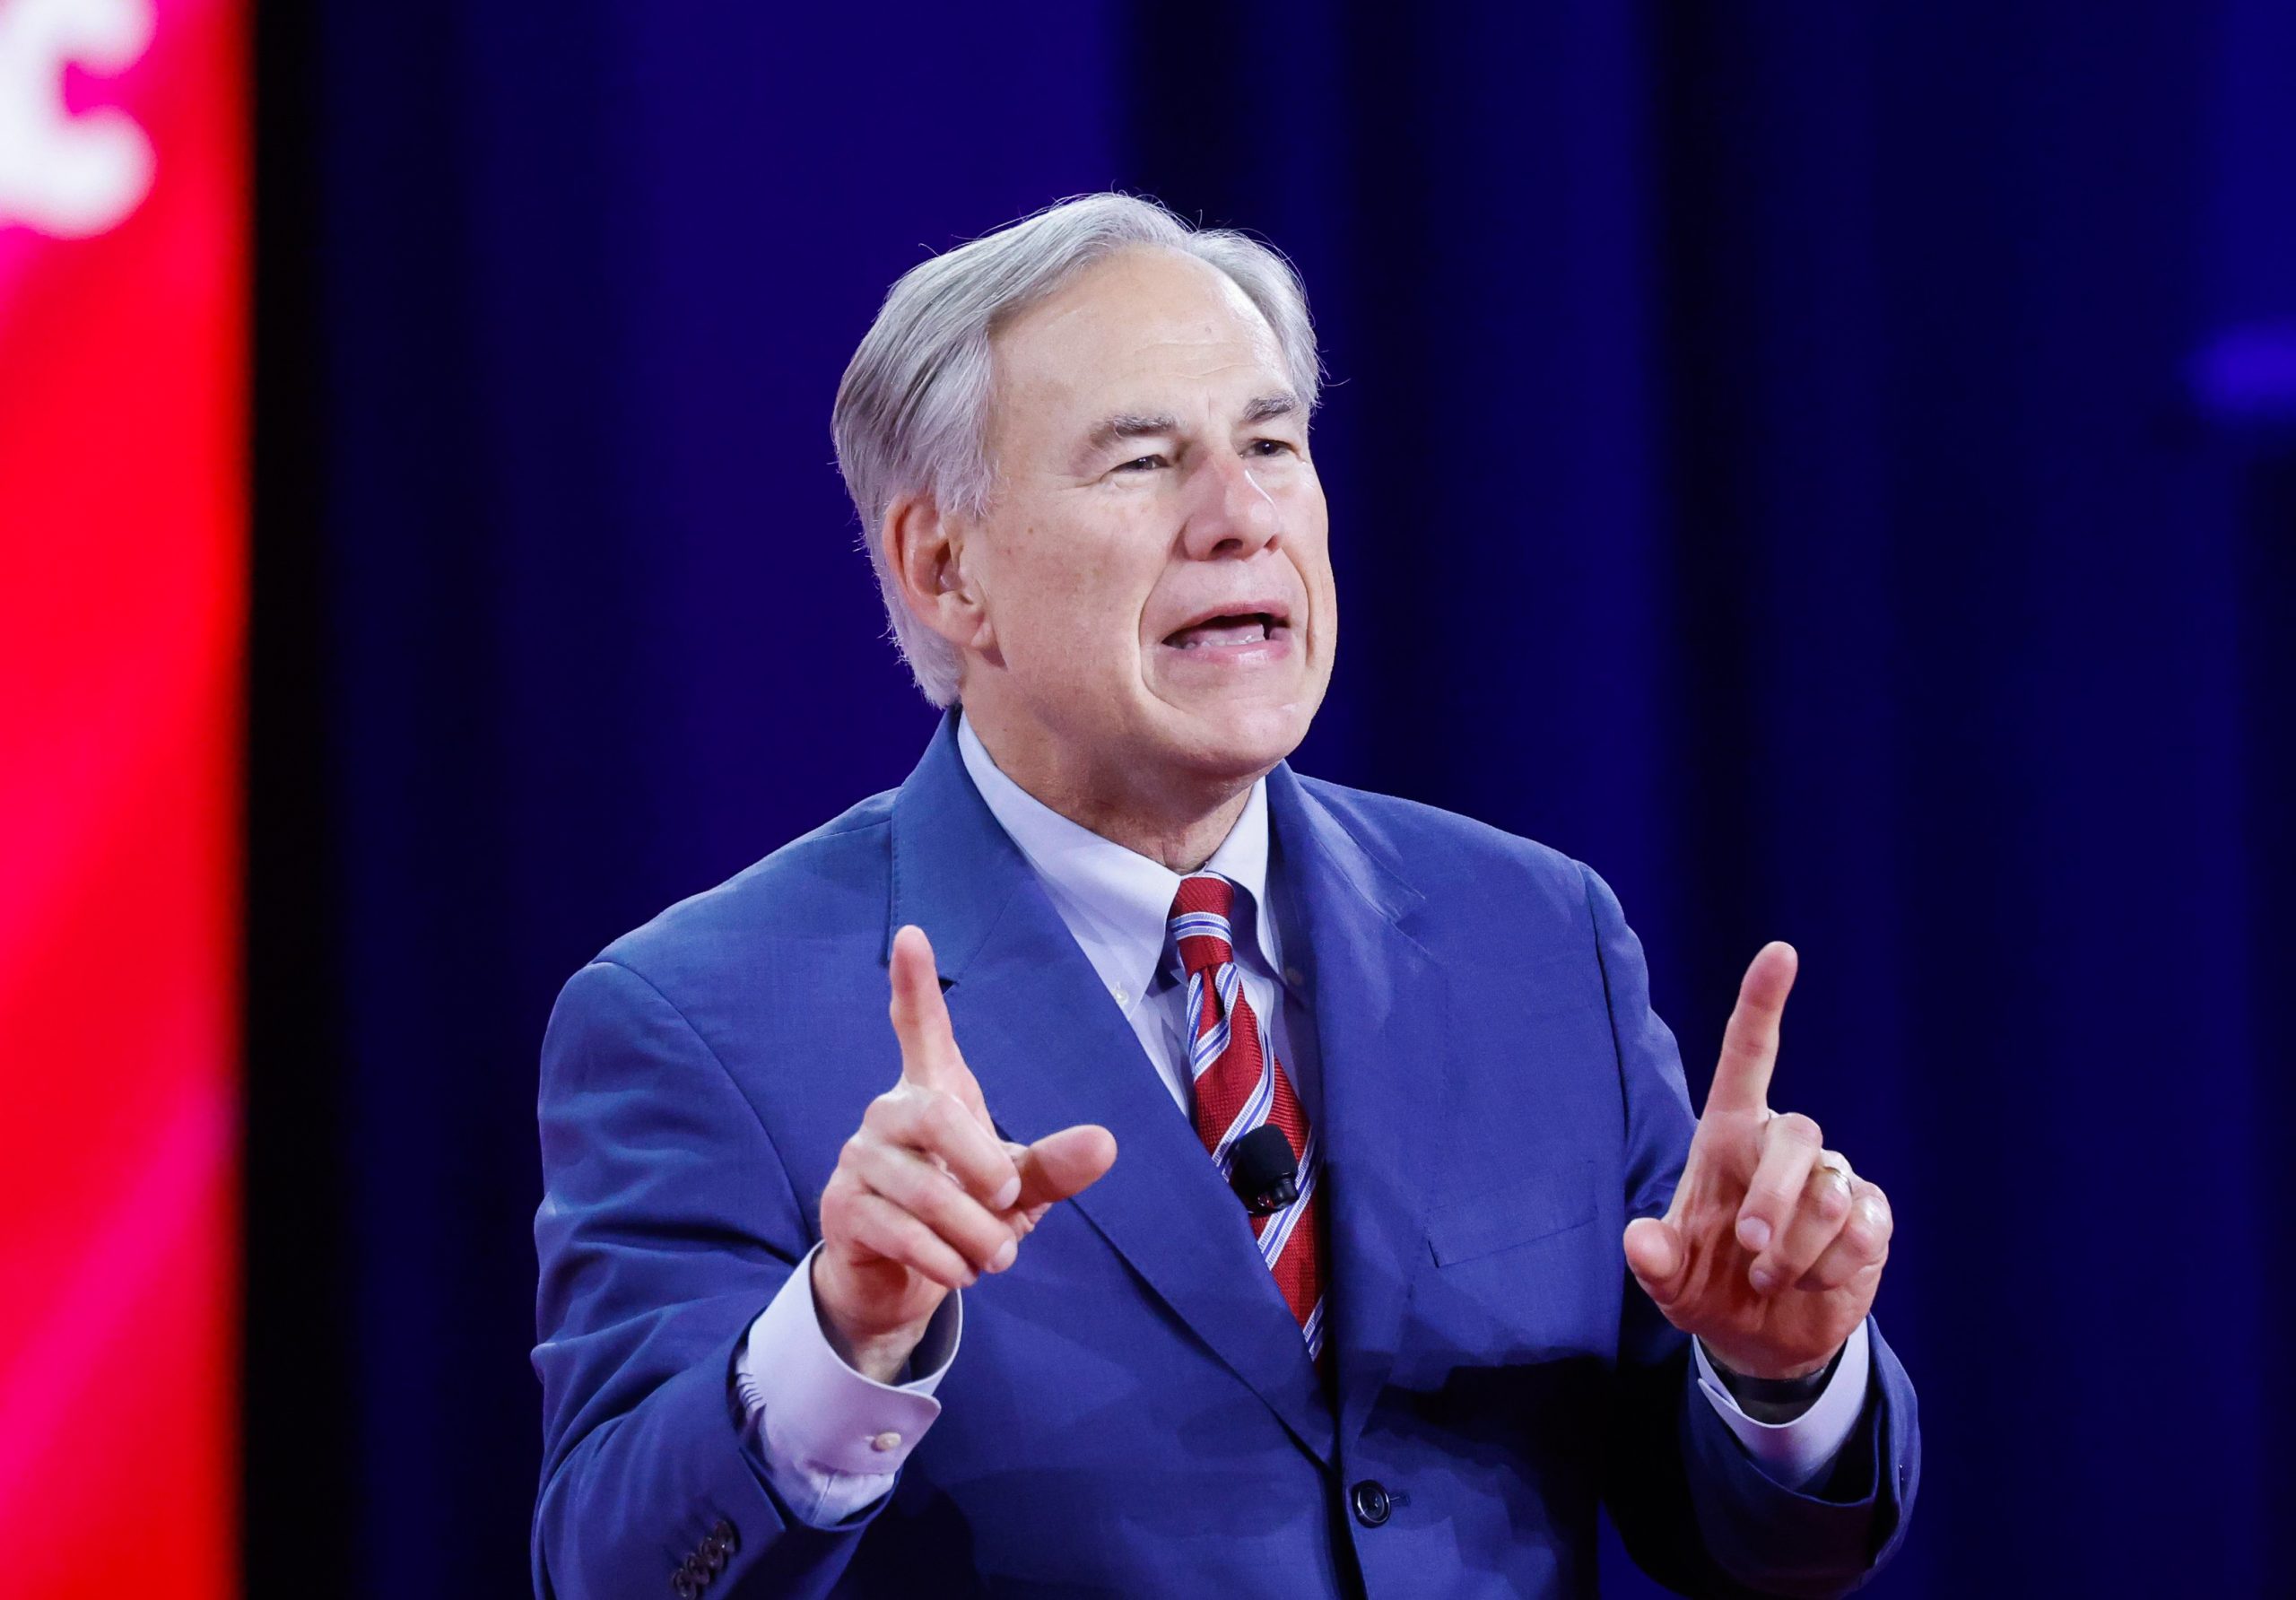 Texas Gov. Greg Abbott speaks during Day 1 of the Conservative Political Action Conference at the Hilton Anatole in Dallas on Aug. 4, 2022. Shafkat Anowar/The Dallas Morning News/TNS